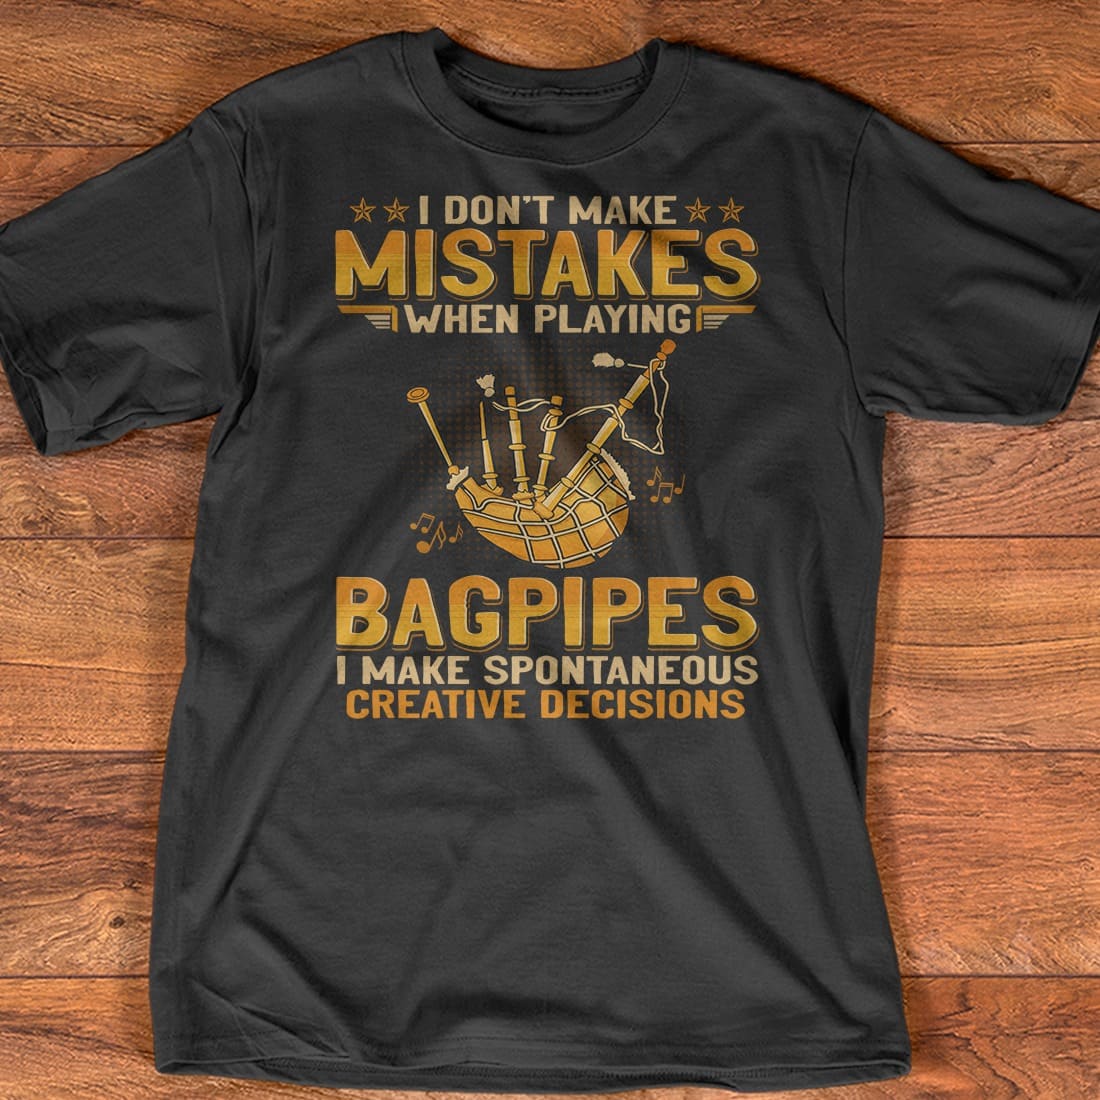 I don't make mistakes when playing bagpipes I make spontaneous creative decisions- Bagpipes traditional instrument